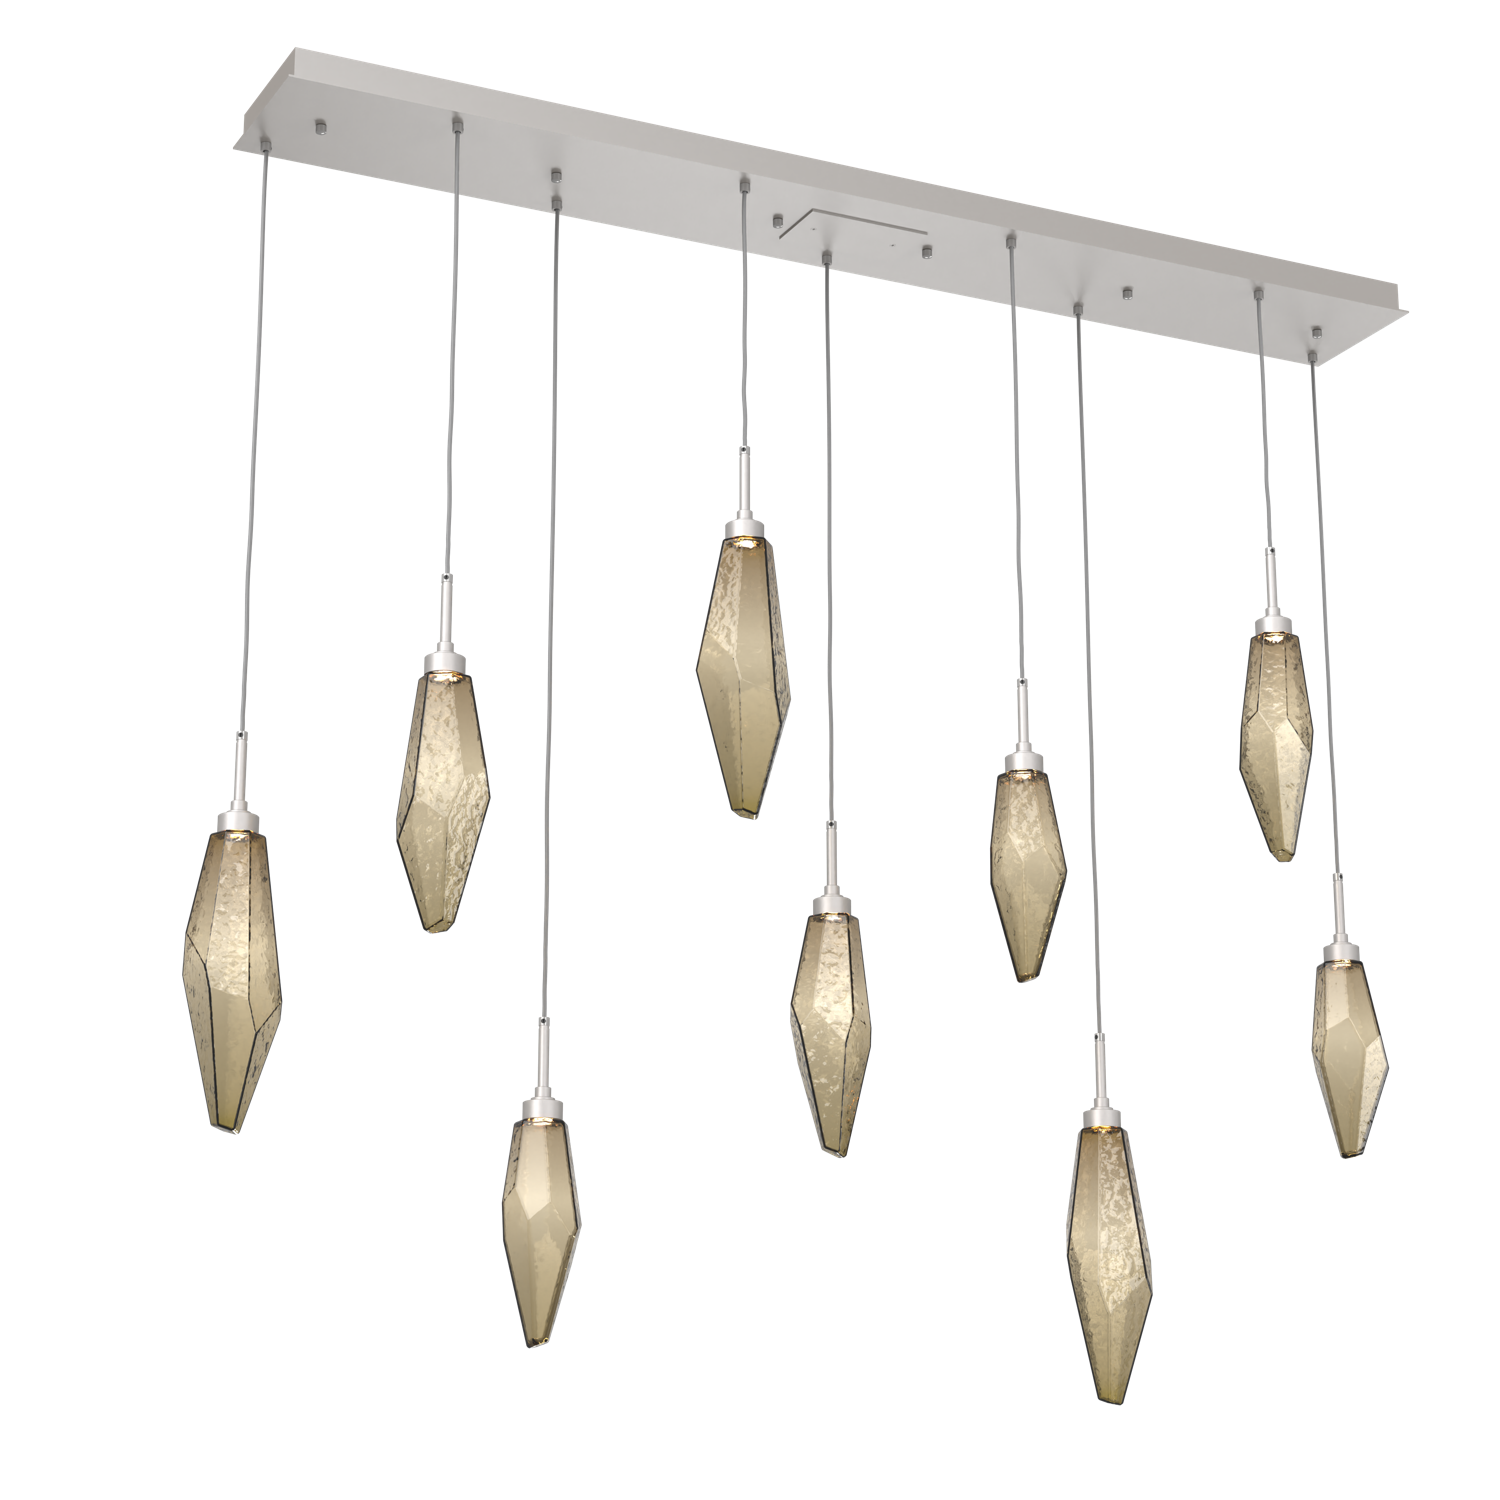 PLB0050-09-BS-CB-Hammerton-Studio-Rock-Crystal-9-light-linear-pendant-chandelier-with-beige-silver-finish-and-chilled-bronze-blown-glass-shades-and-LED-lamping